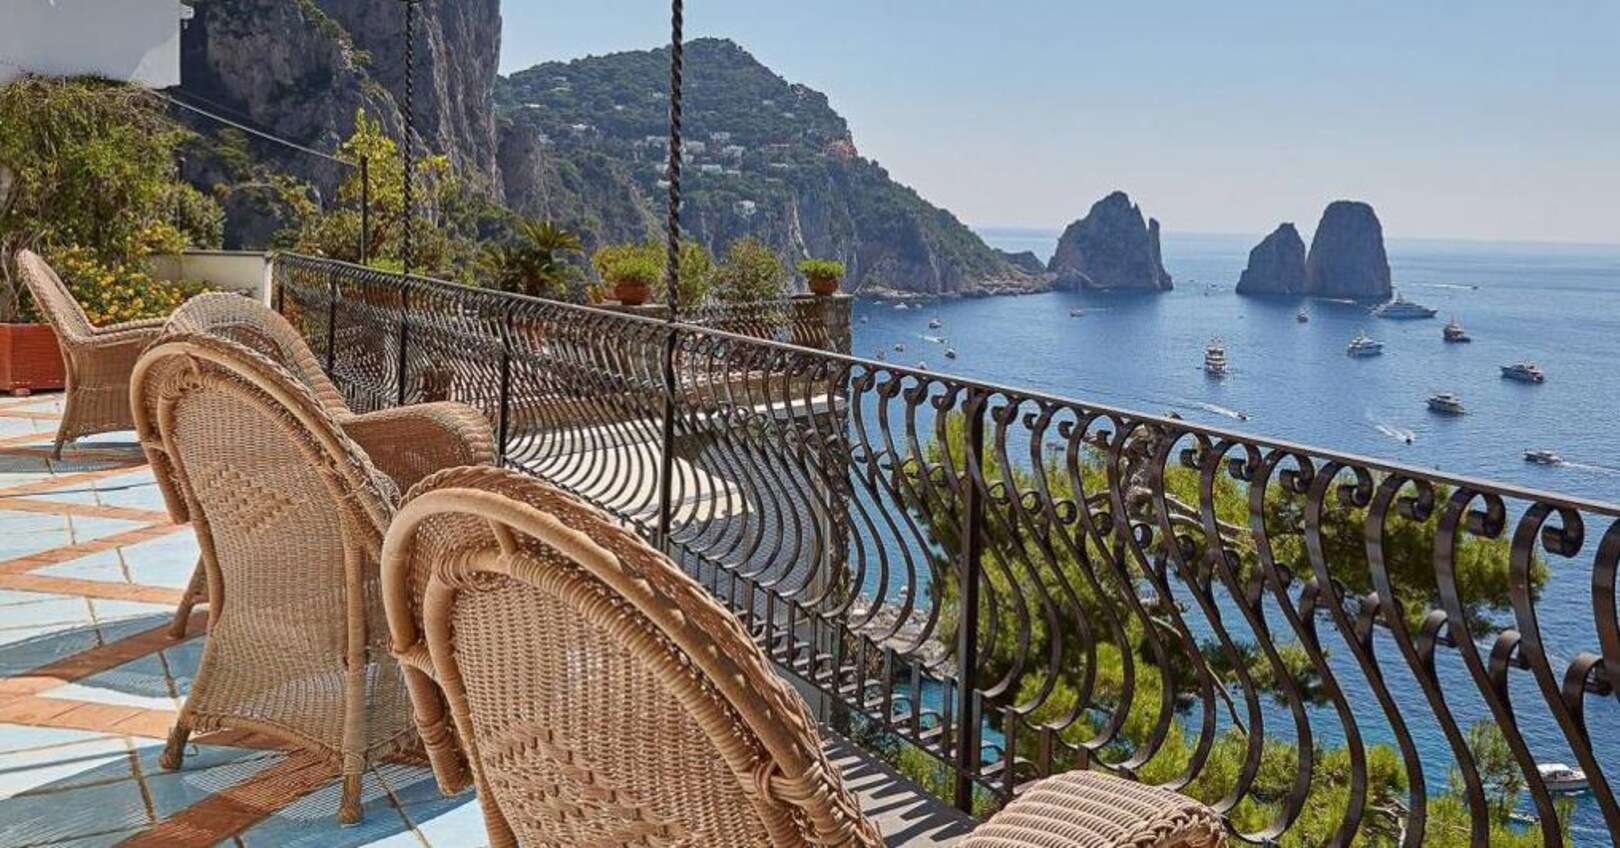 Villas for sale in Capri: a blend of history, glamor, and natural